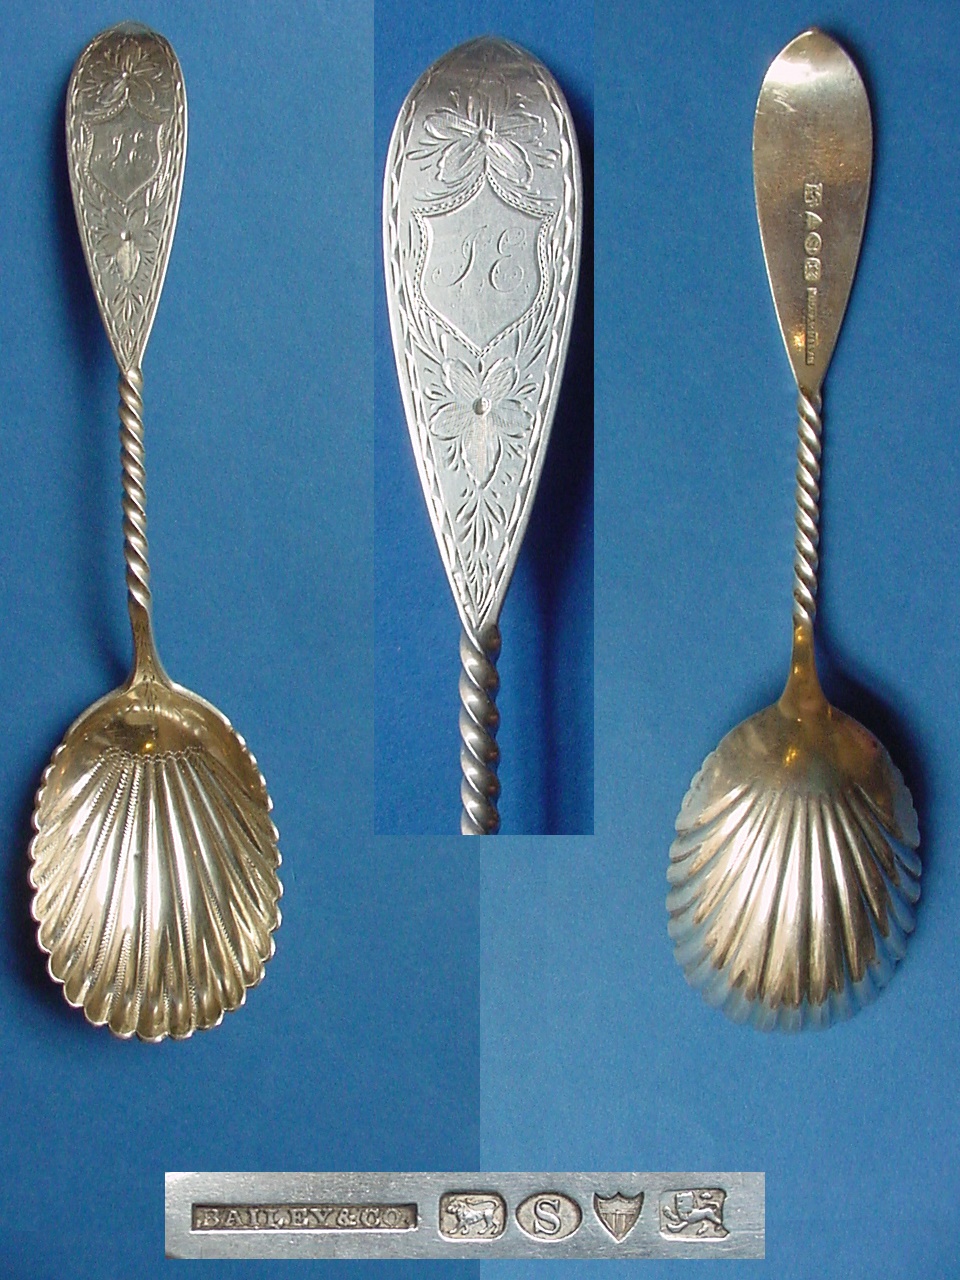 Louis XV by Whiting by Gorham Sterling Silver set of 10 Berry Forks 4.5